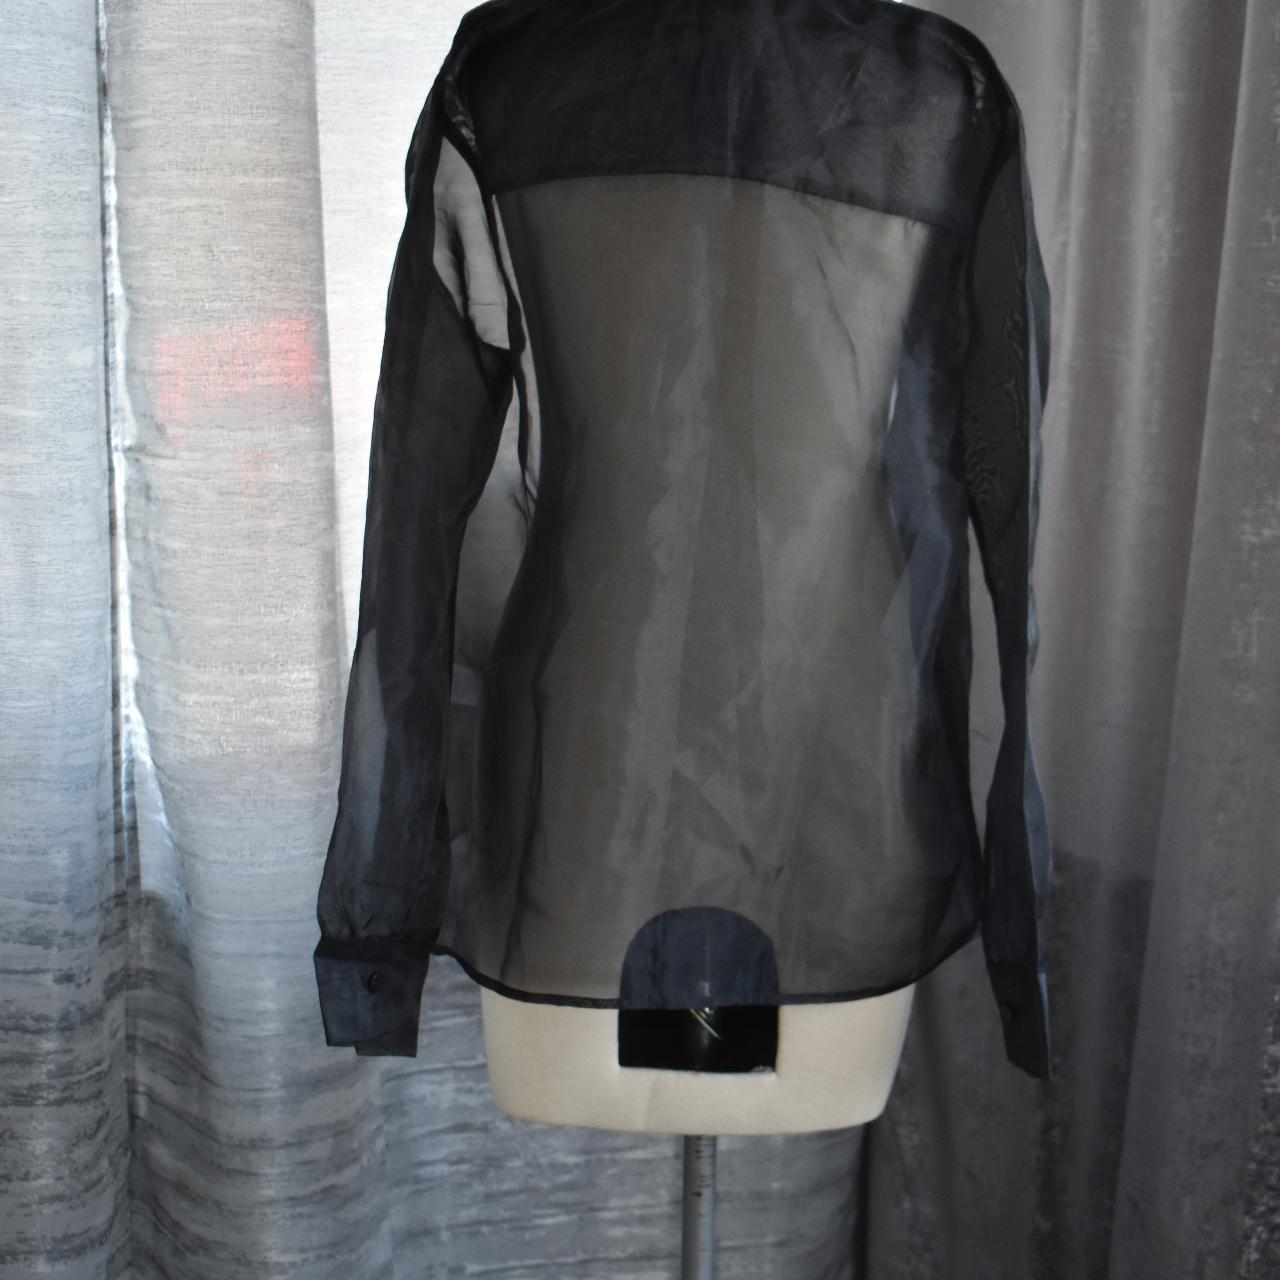 Sheer black Shirt - Forever 21 new with tag size M - Depop